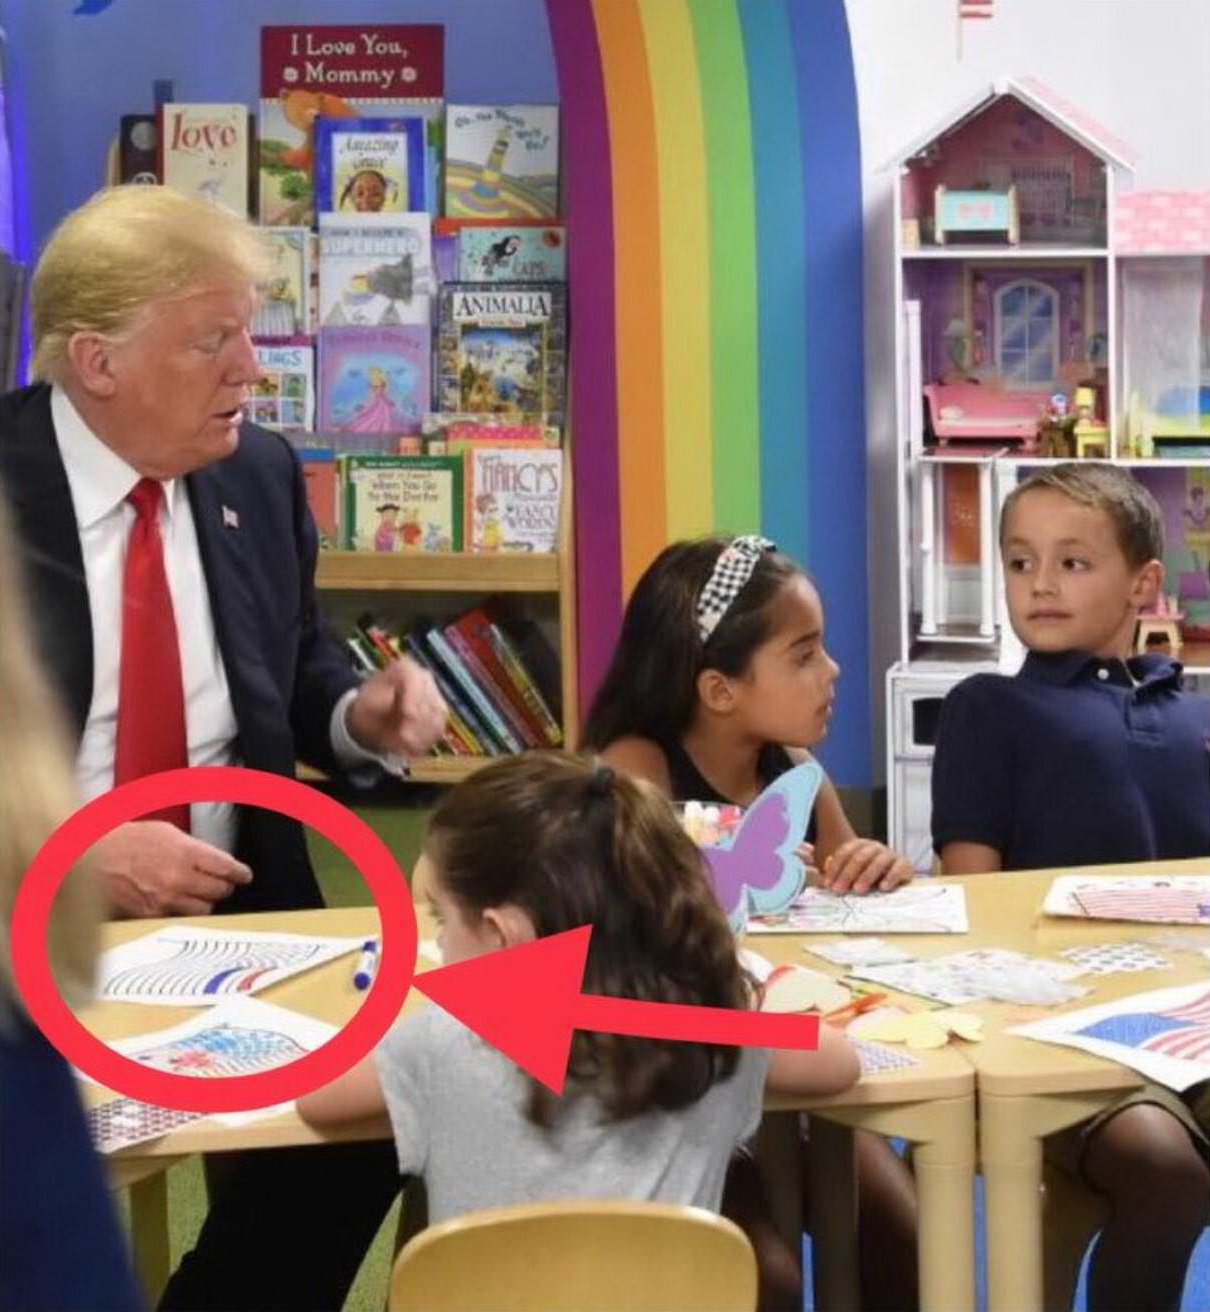 Donald Trump coloring in the American flag wrongly